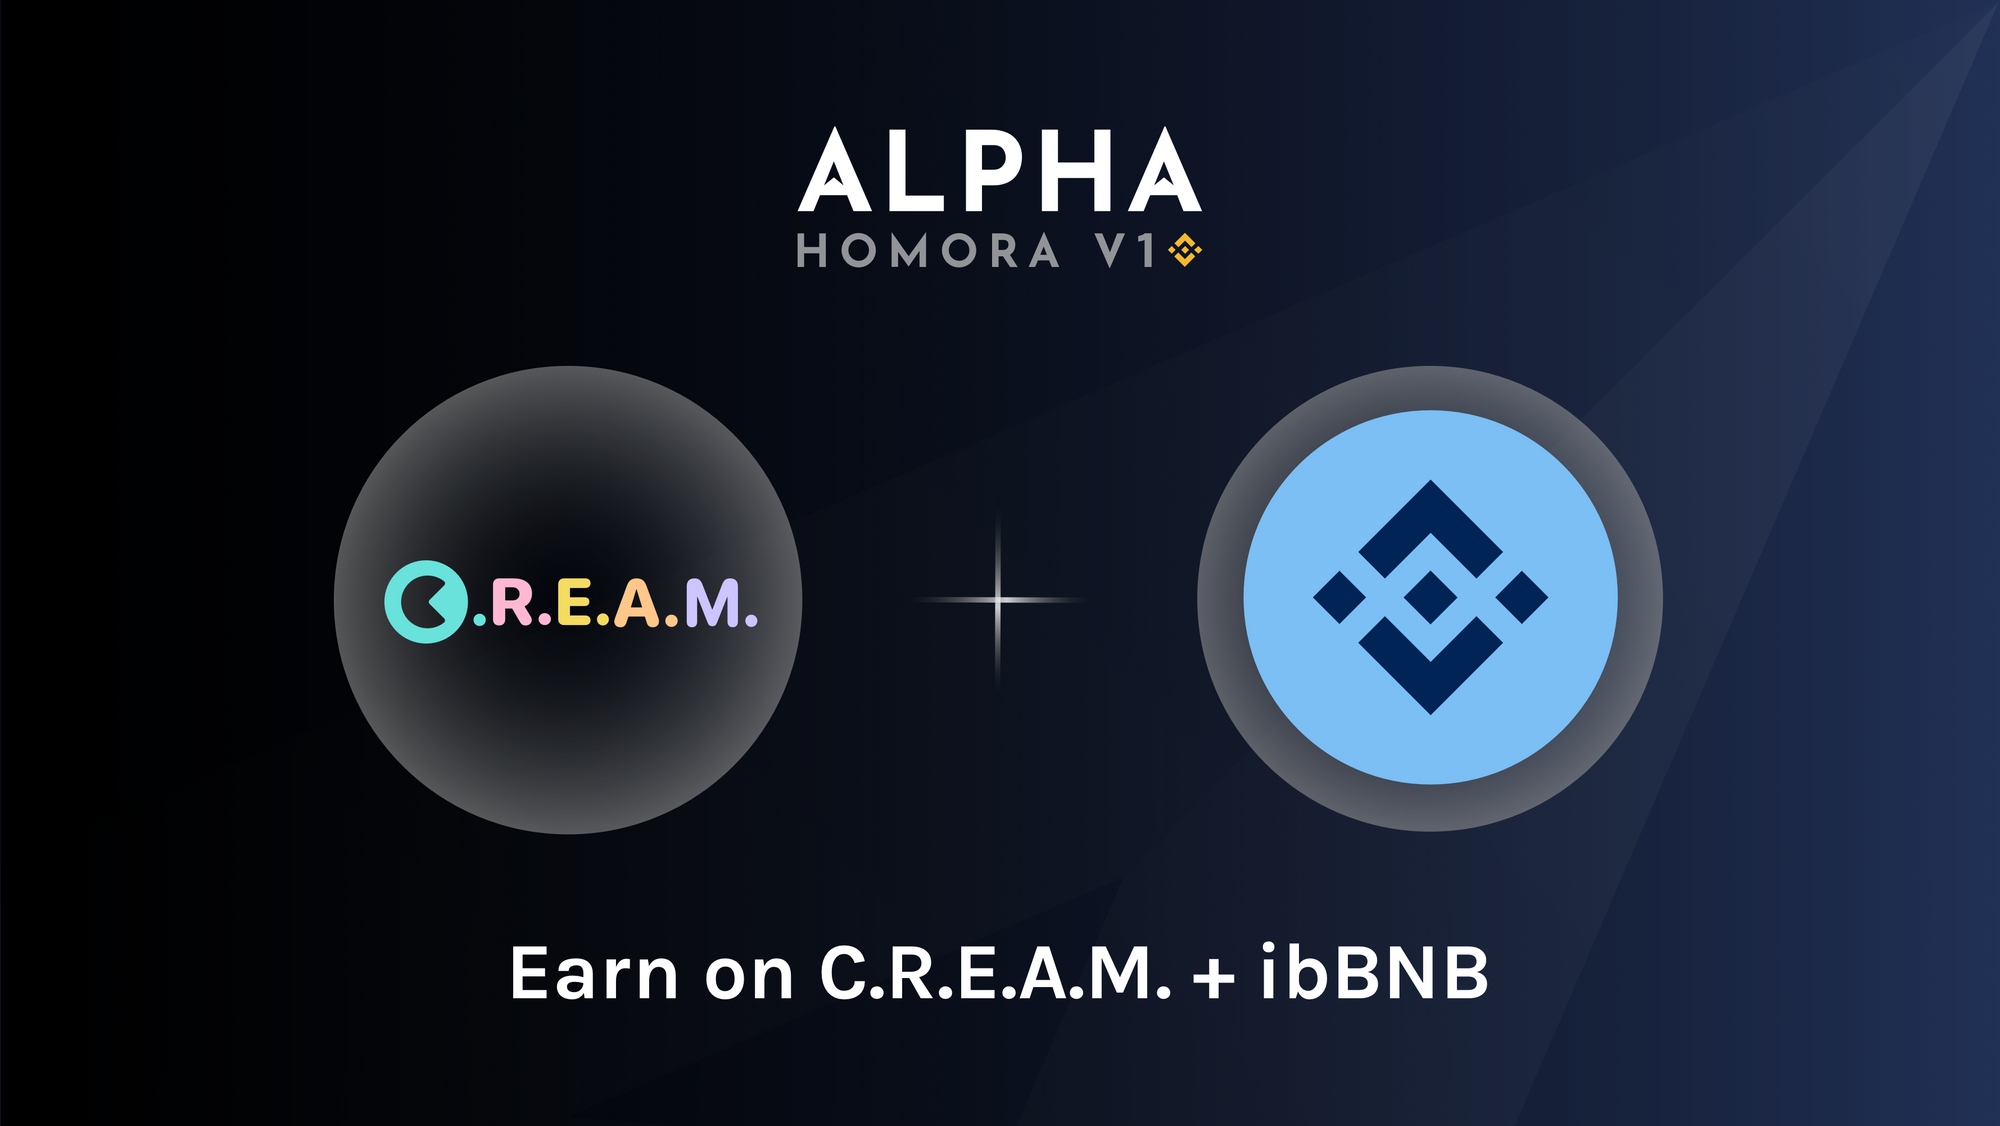 Earn on C.R.E.A.M. + ibBNB